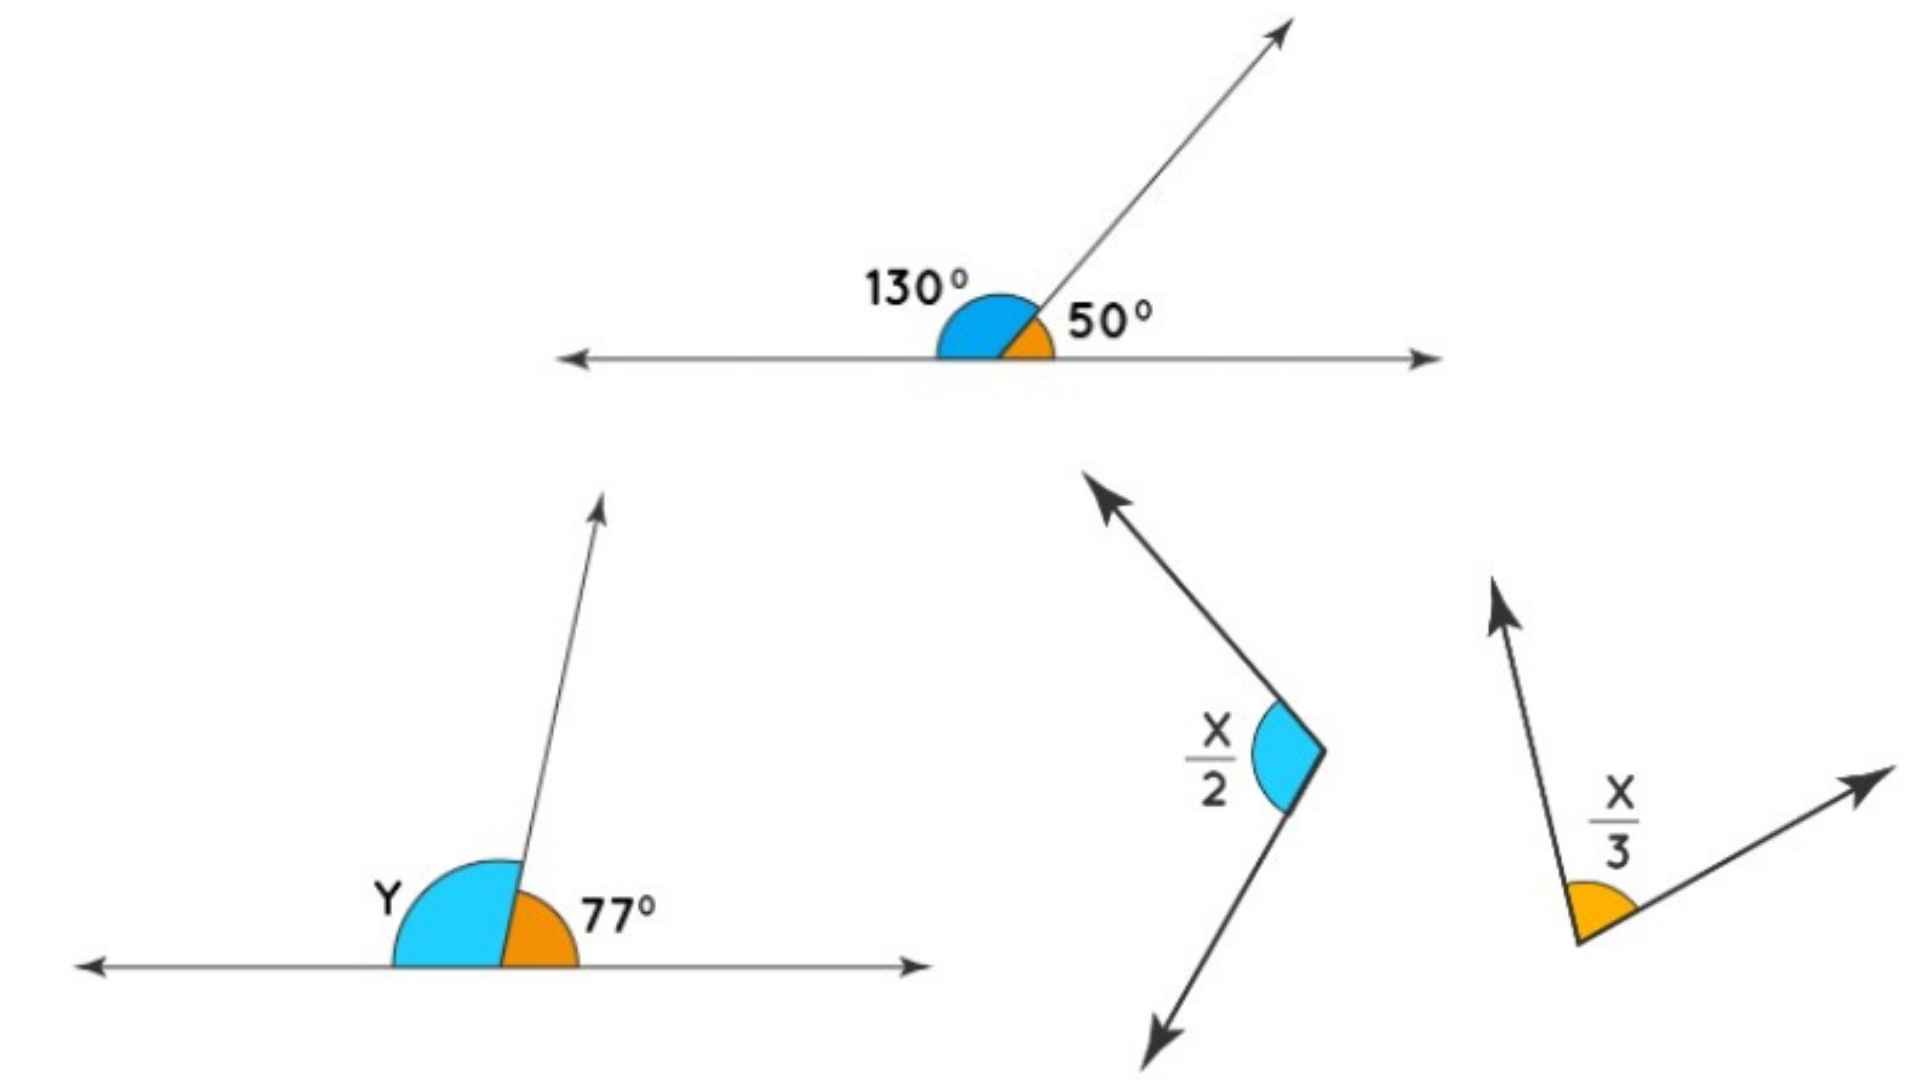 Supplementary Angles